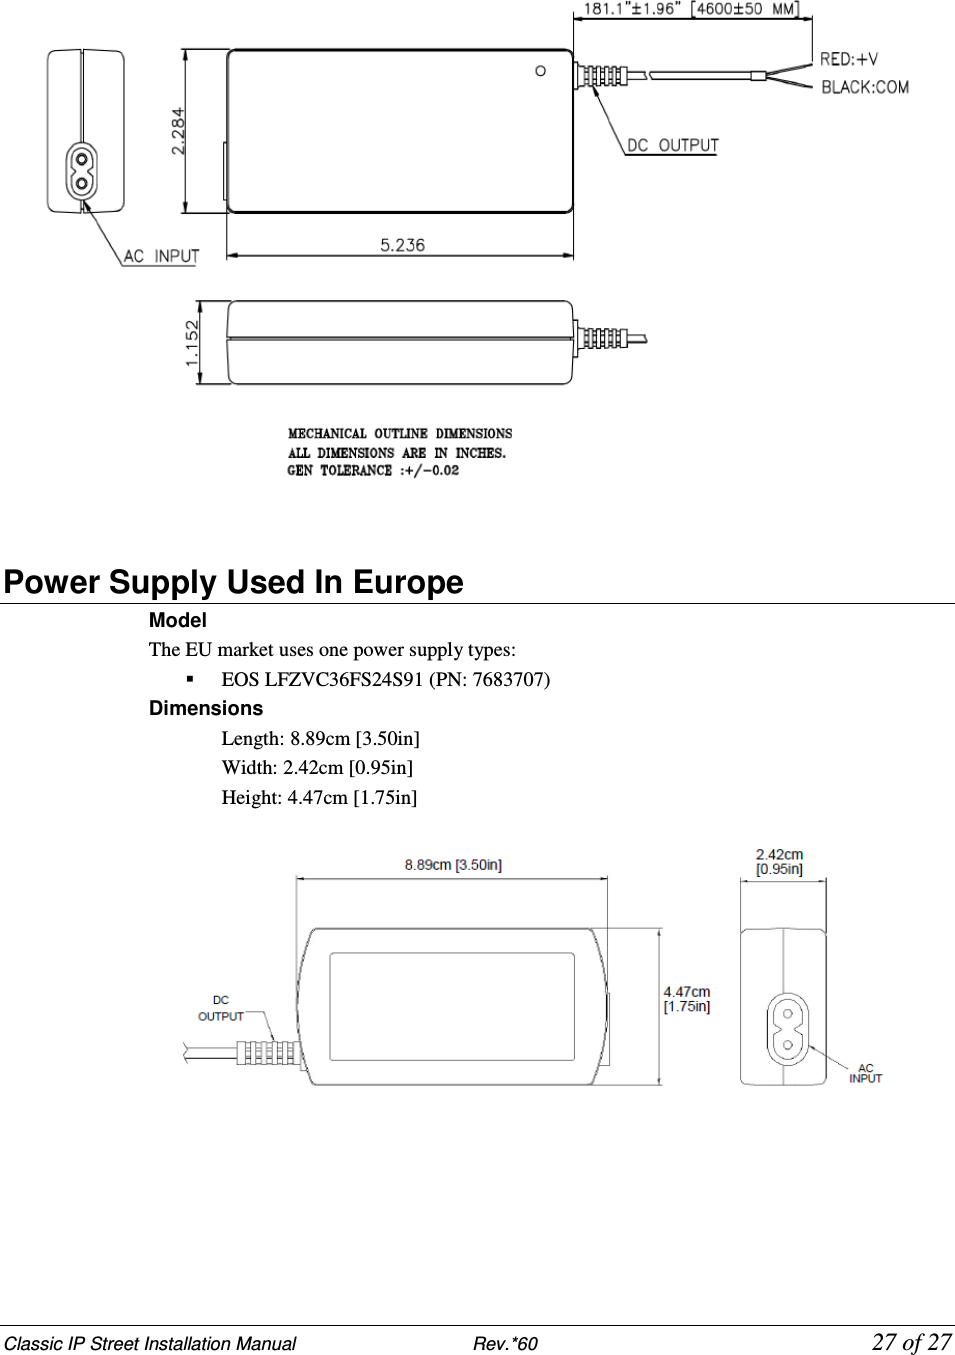 Classic IP Street Installation Manual                           Rev.*60            27 of 27  Power Supply Used In Europe Model The EU market uses one power supply types:  EOS LFZVC36FS24S91 (PN: 7683707) Dimensions Length: 8.89cm [3.50in]  Width: 2.42cm [0.95in]  Height: 4.47cm [1.75in]     